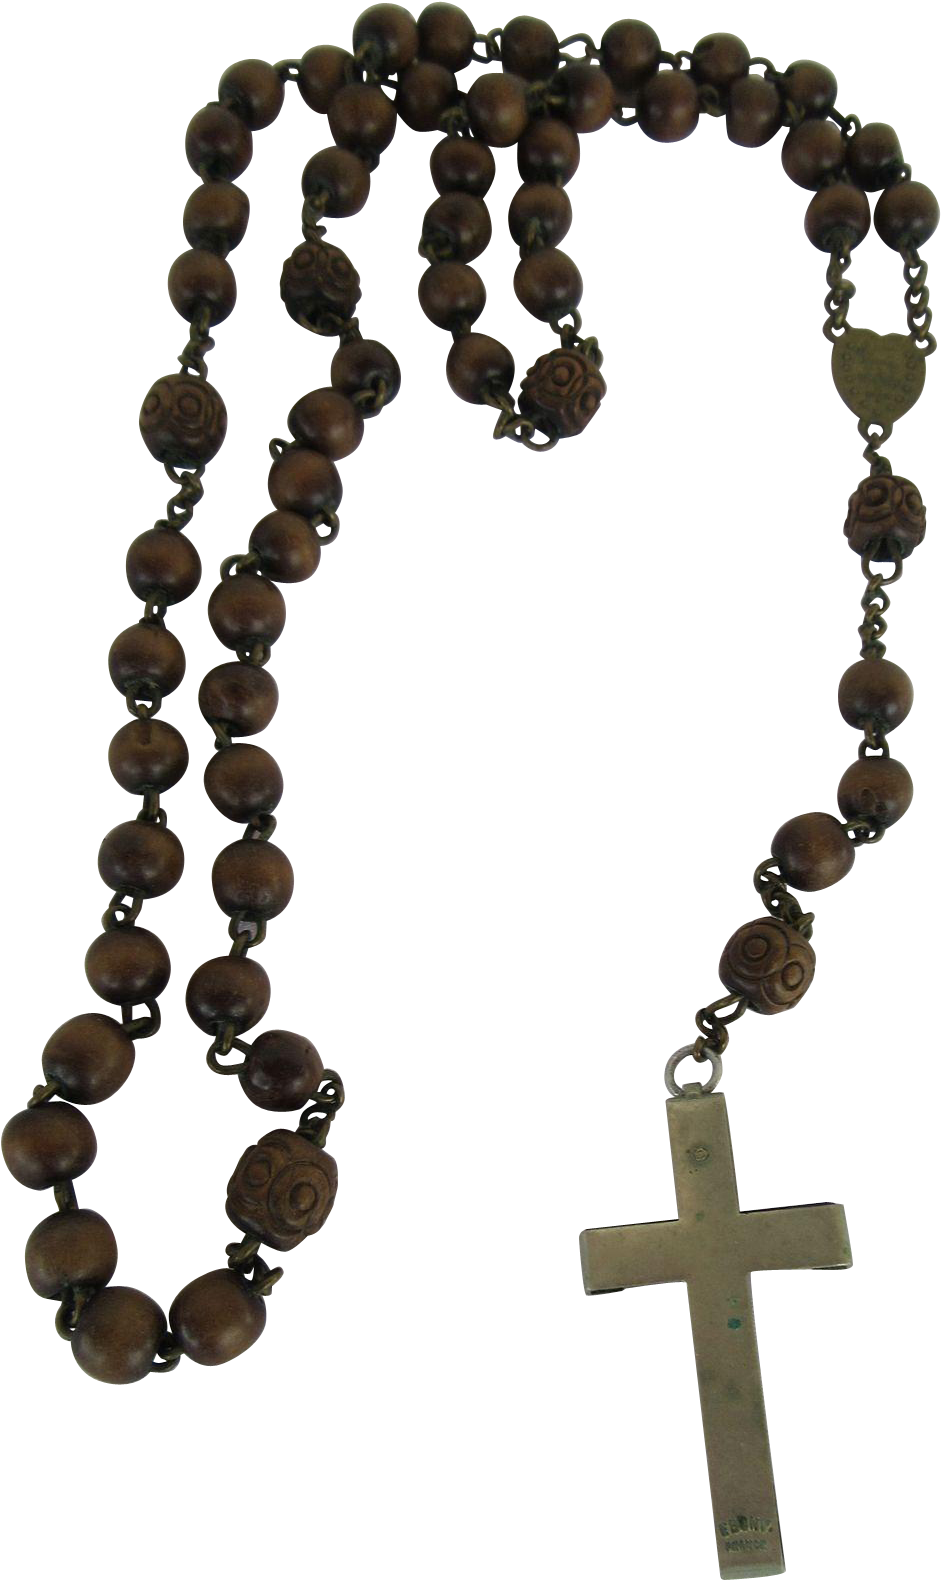 Rosary Free Transparent Image HD PNG Image